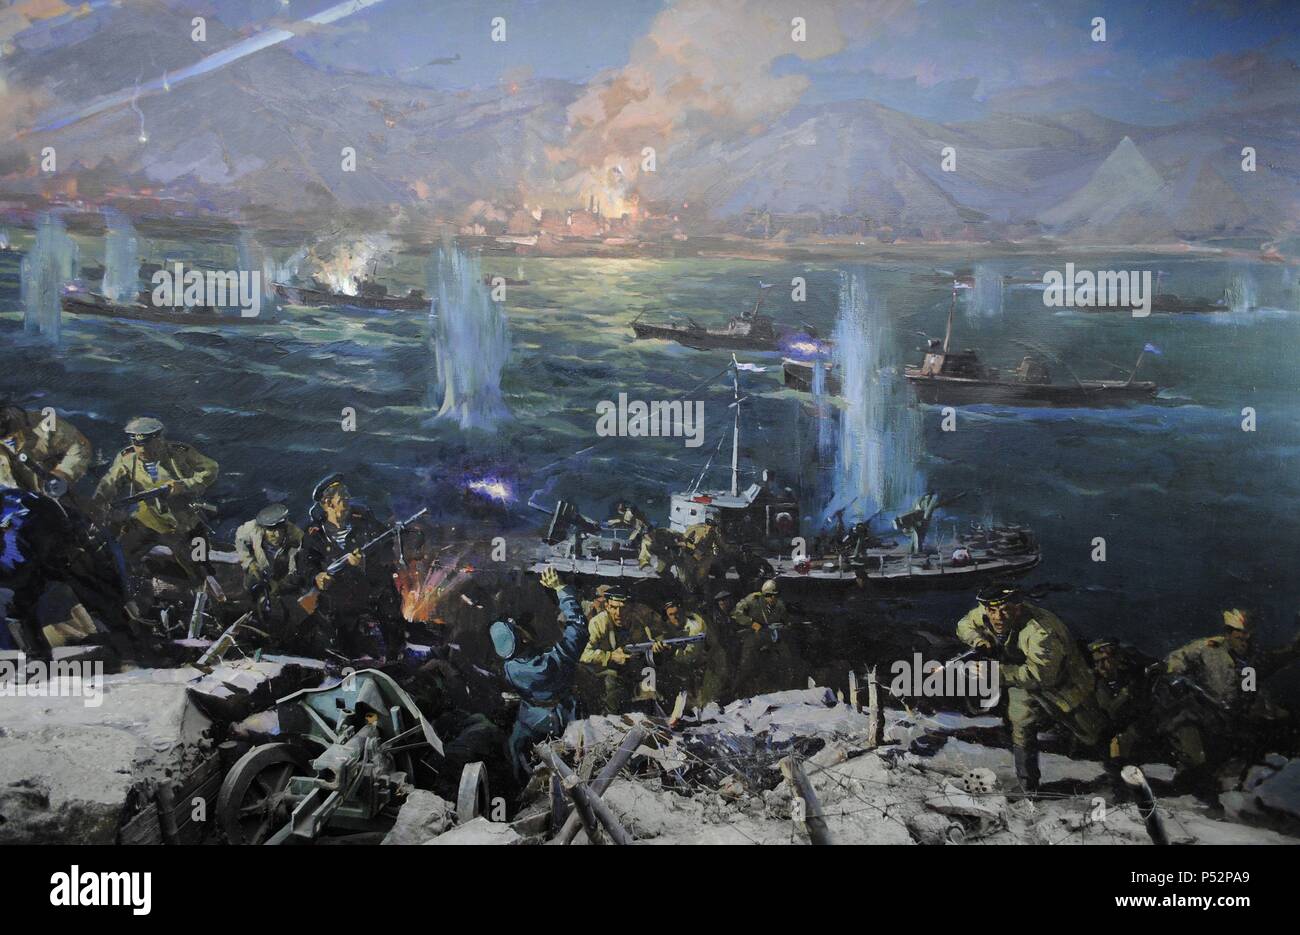 World War II. Russia. Battle of the Caucasus. Novorossiysk-Taman Strategic Offensive Operation, led by the Chief of Staff Ivan Petrov, in 1943. The Red Army landing on the Taman Peninsula and liberation of Novorossiysk, a Russian city in the Black Sea coast. Painting. Museum of Black Sea Fleet. Sevastopol. Ukraine. Stock Photo